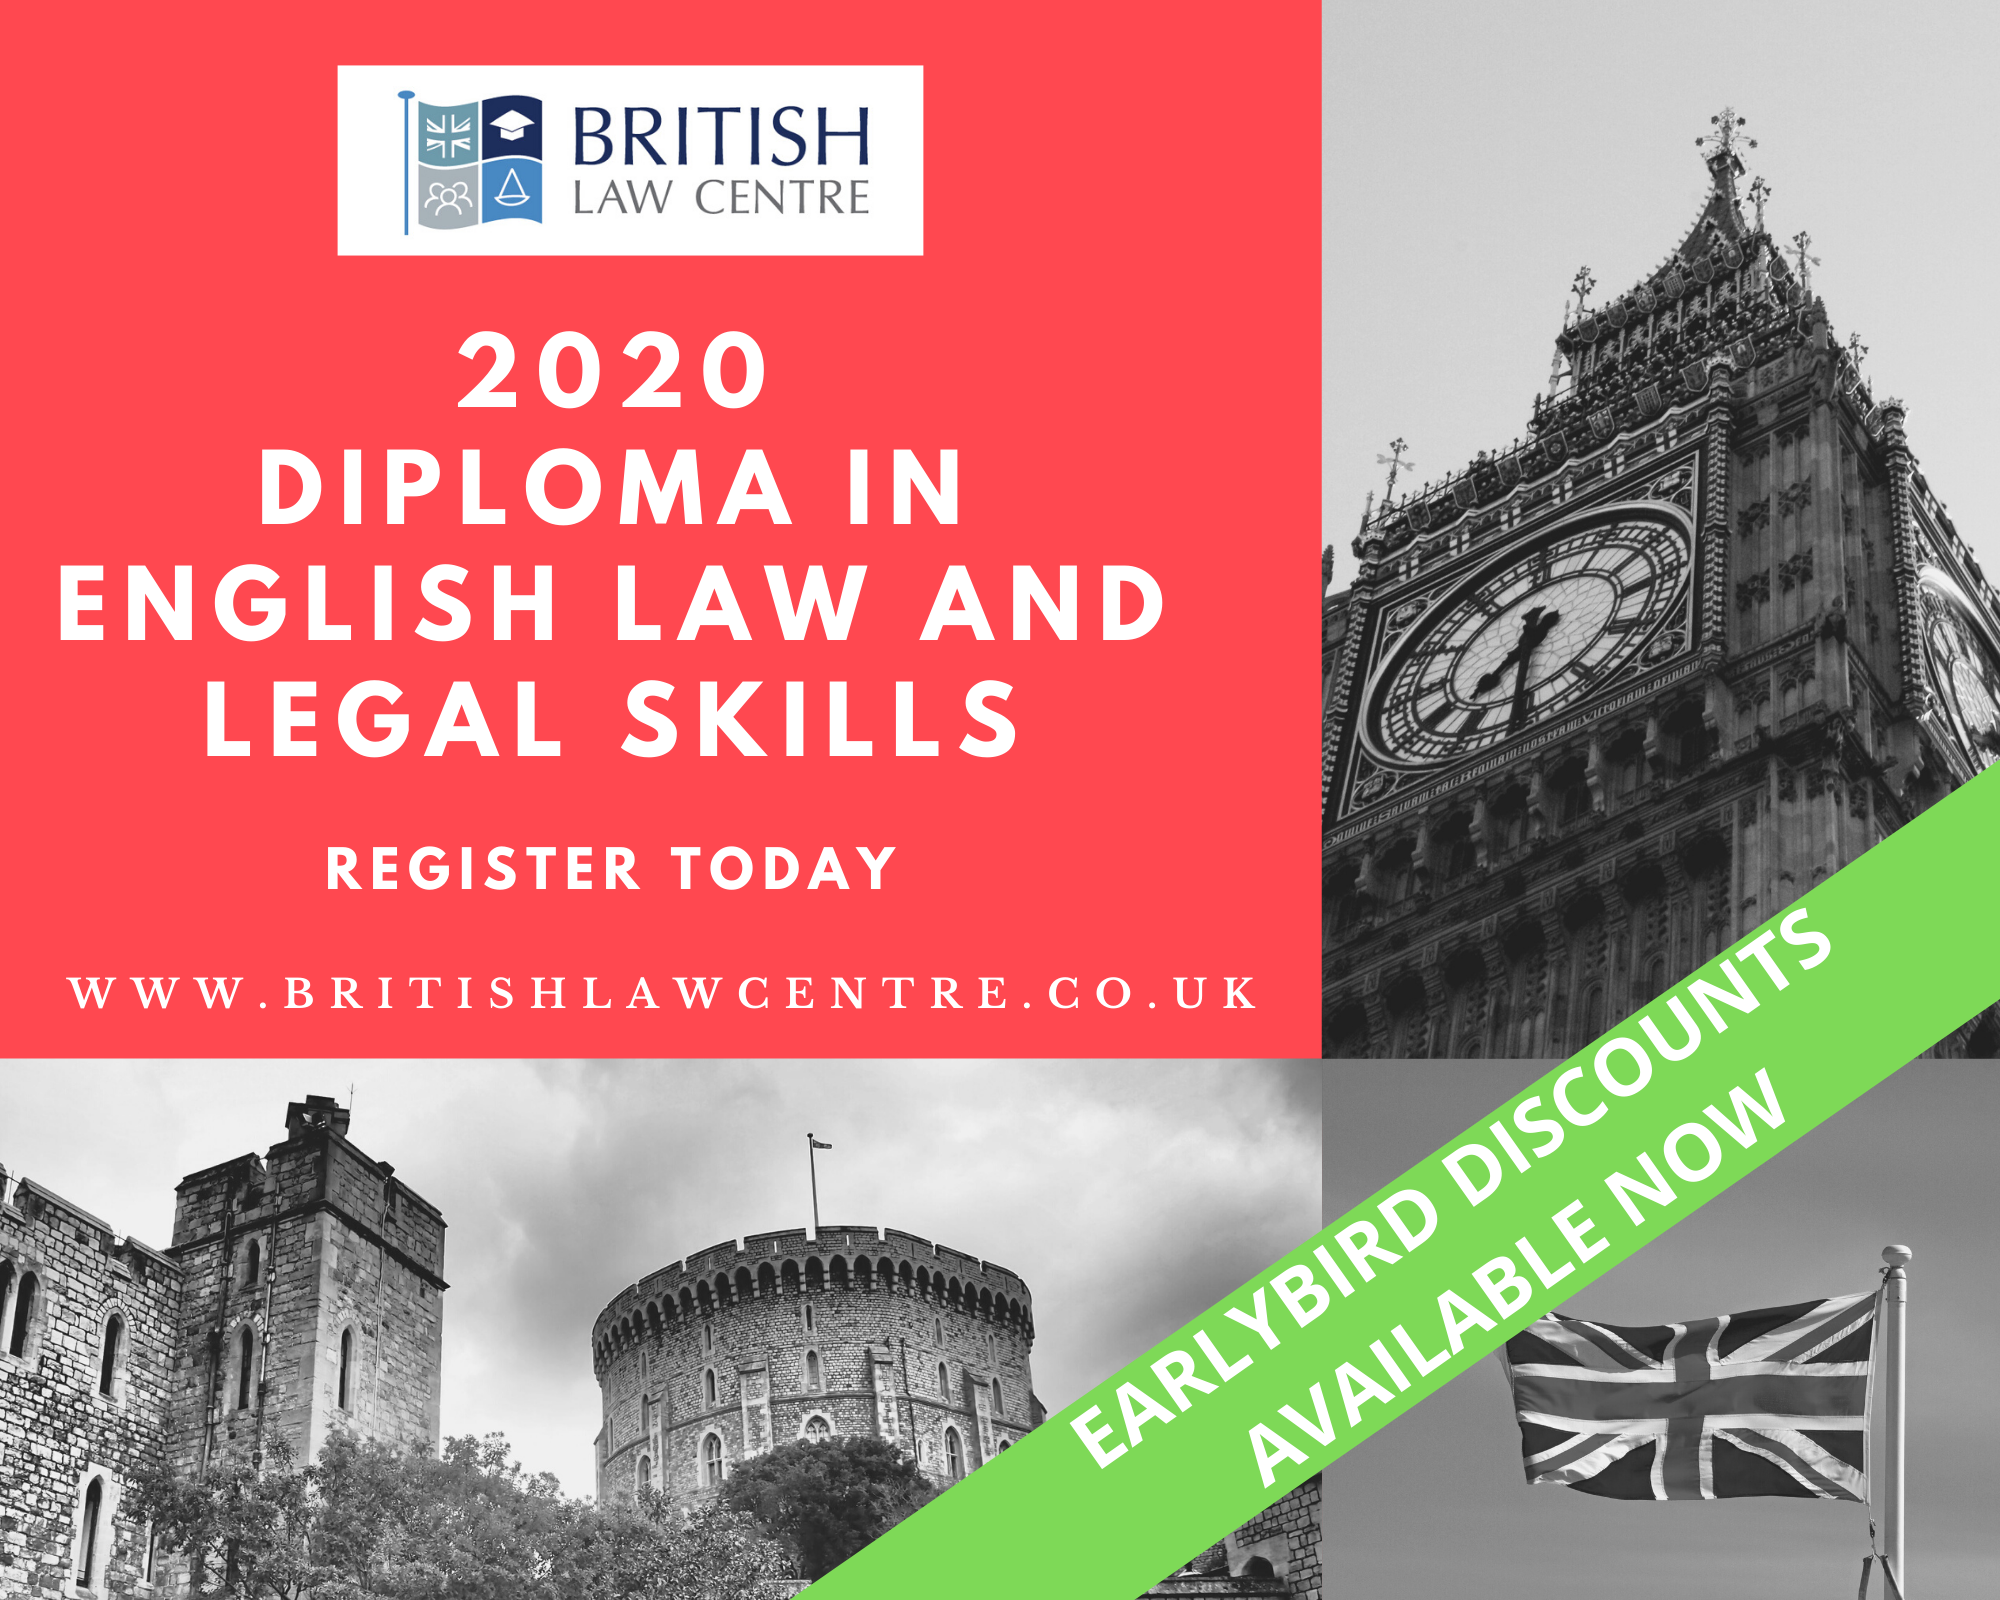 Diploma in English Law and Practical Legal Skills